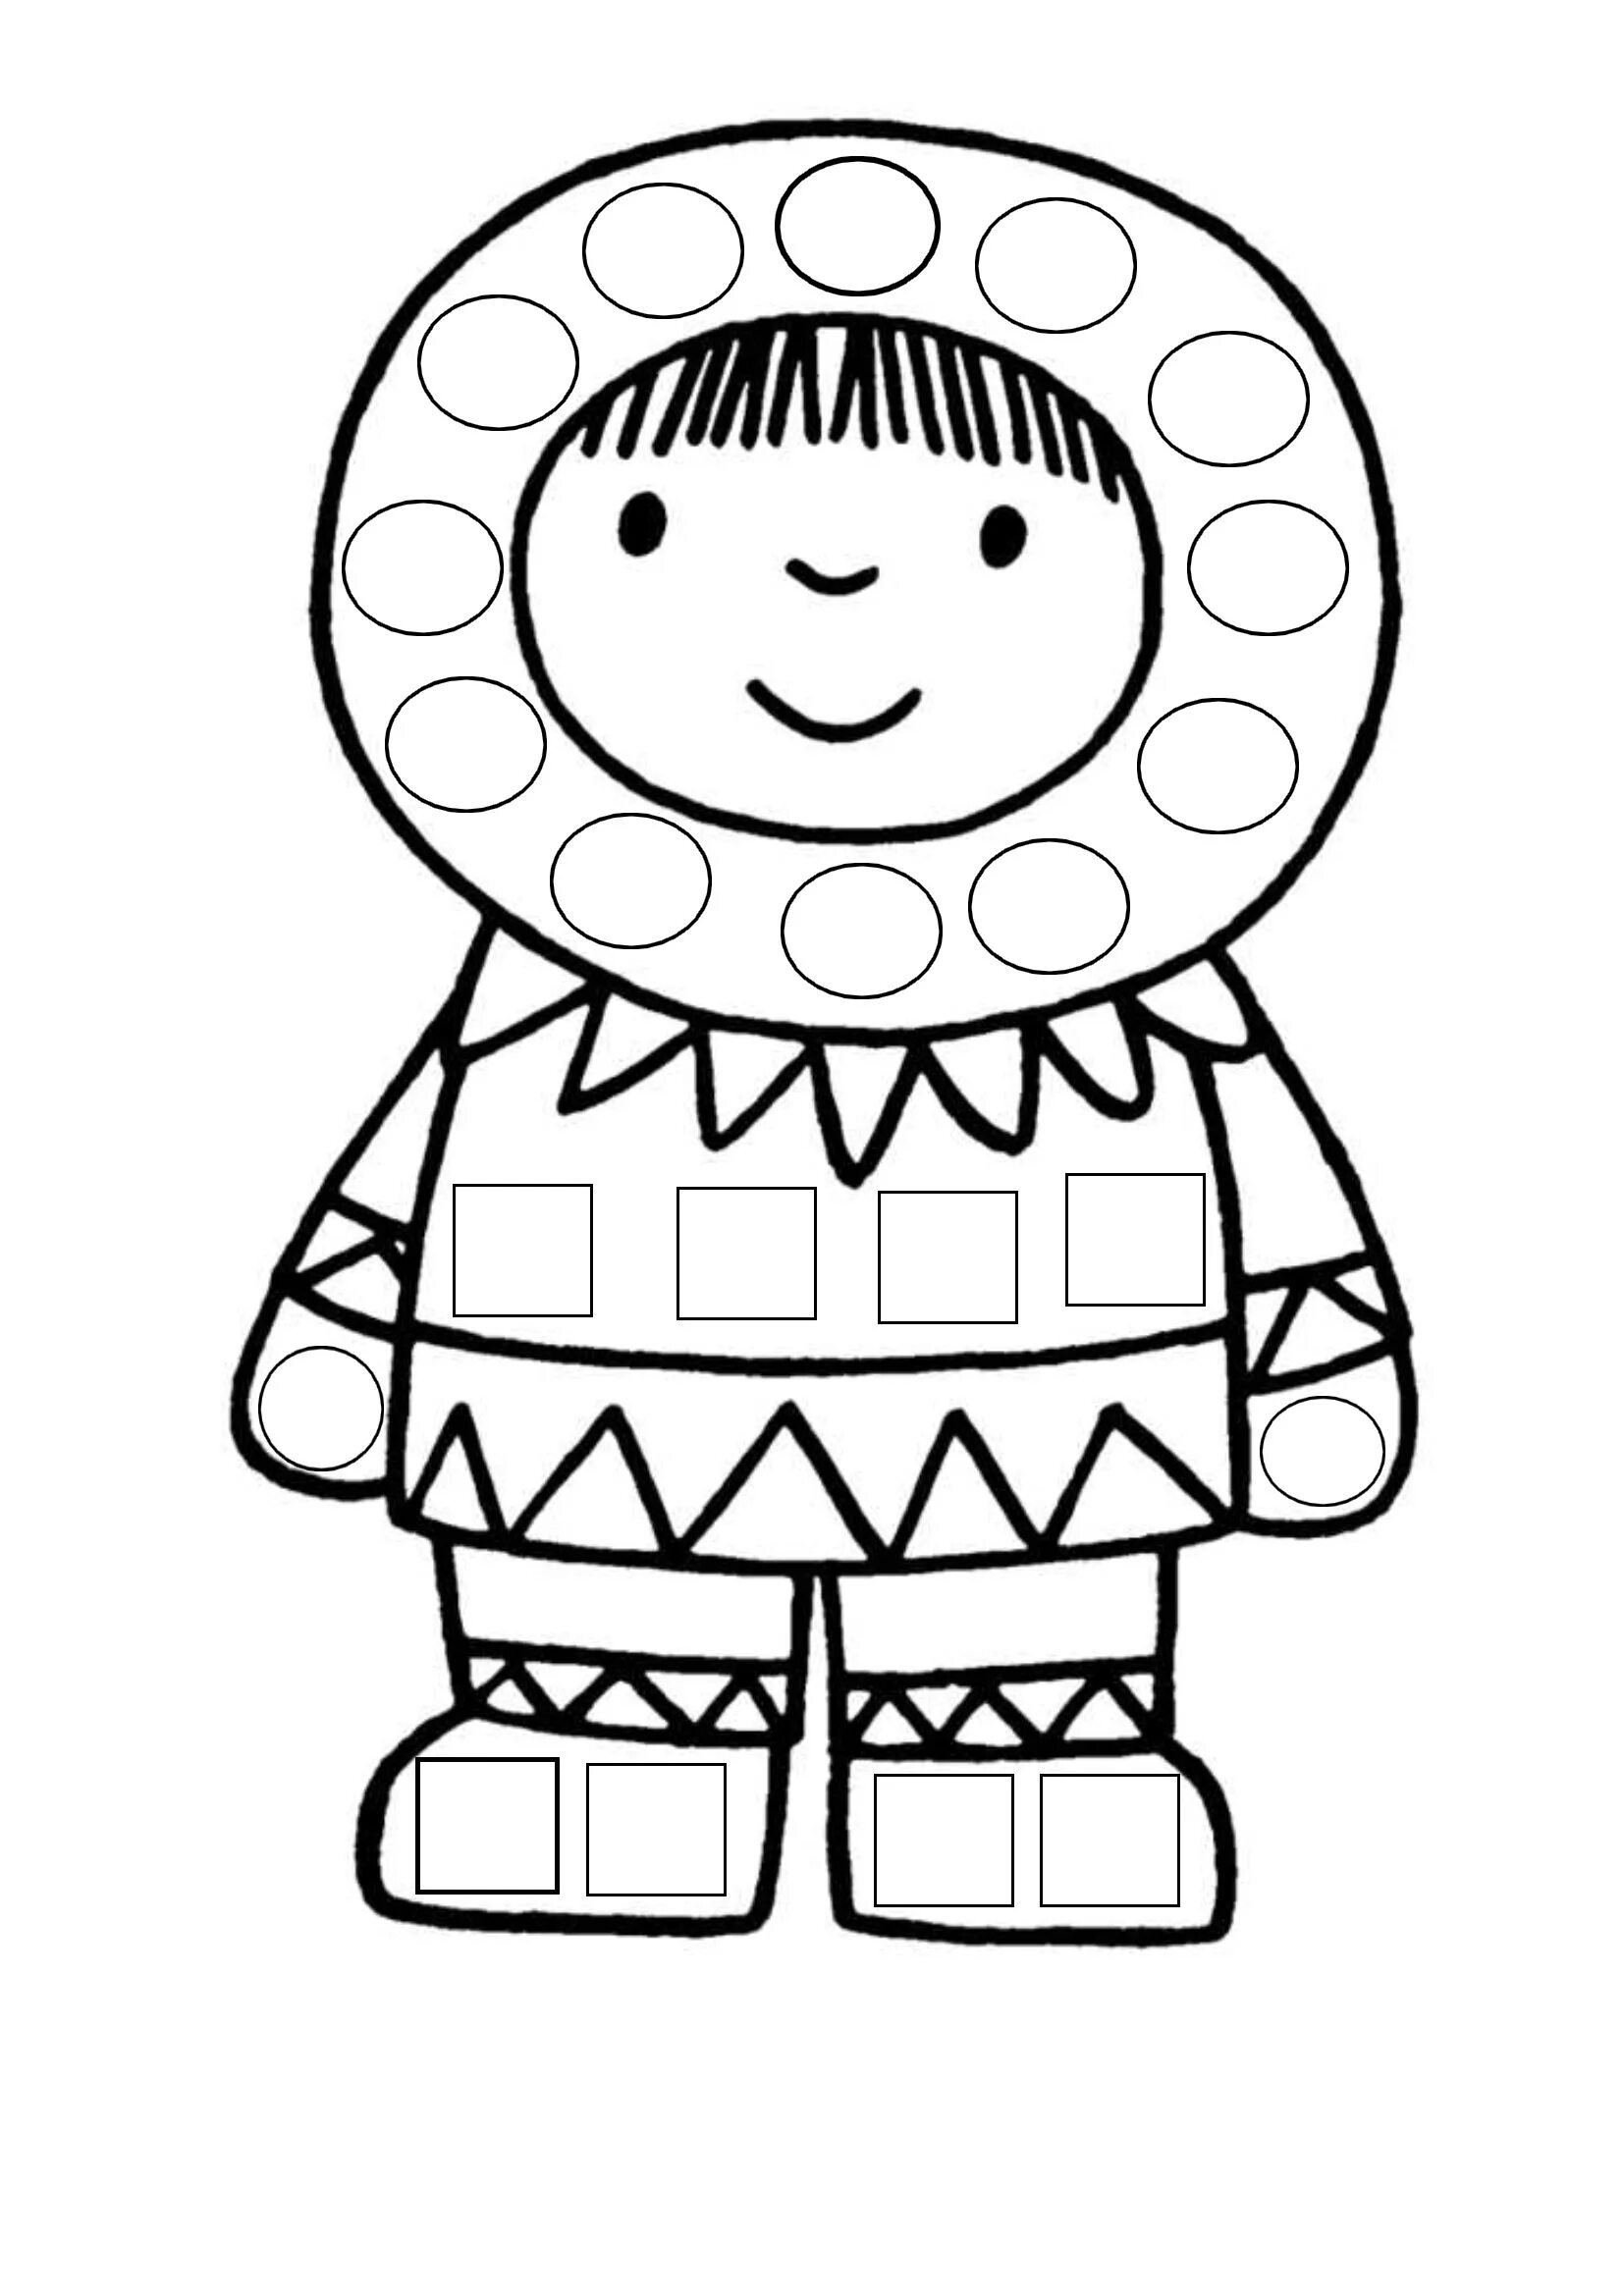 Teasing Chukchi coloring book for teens